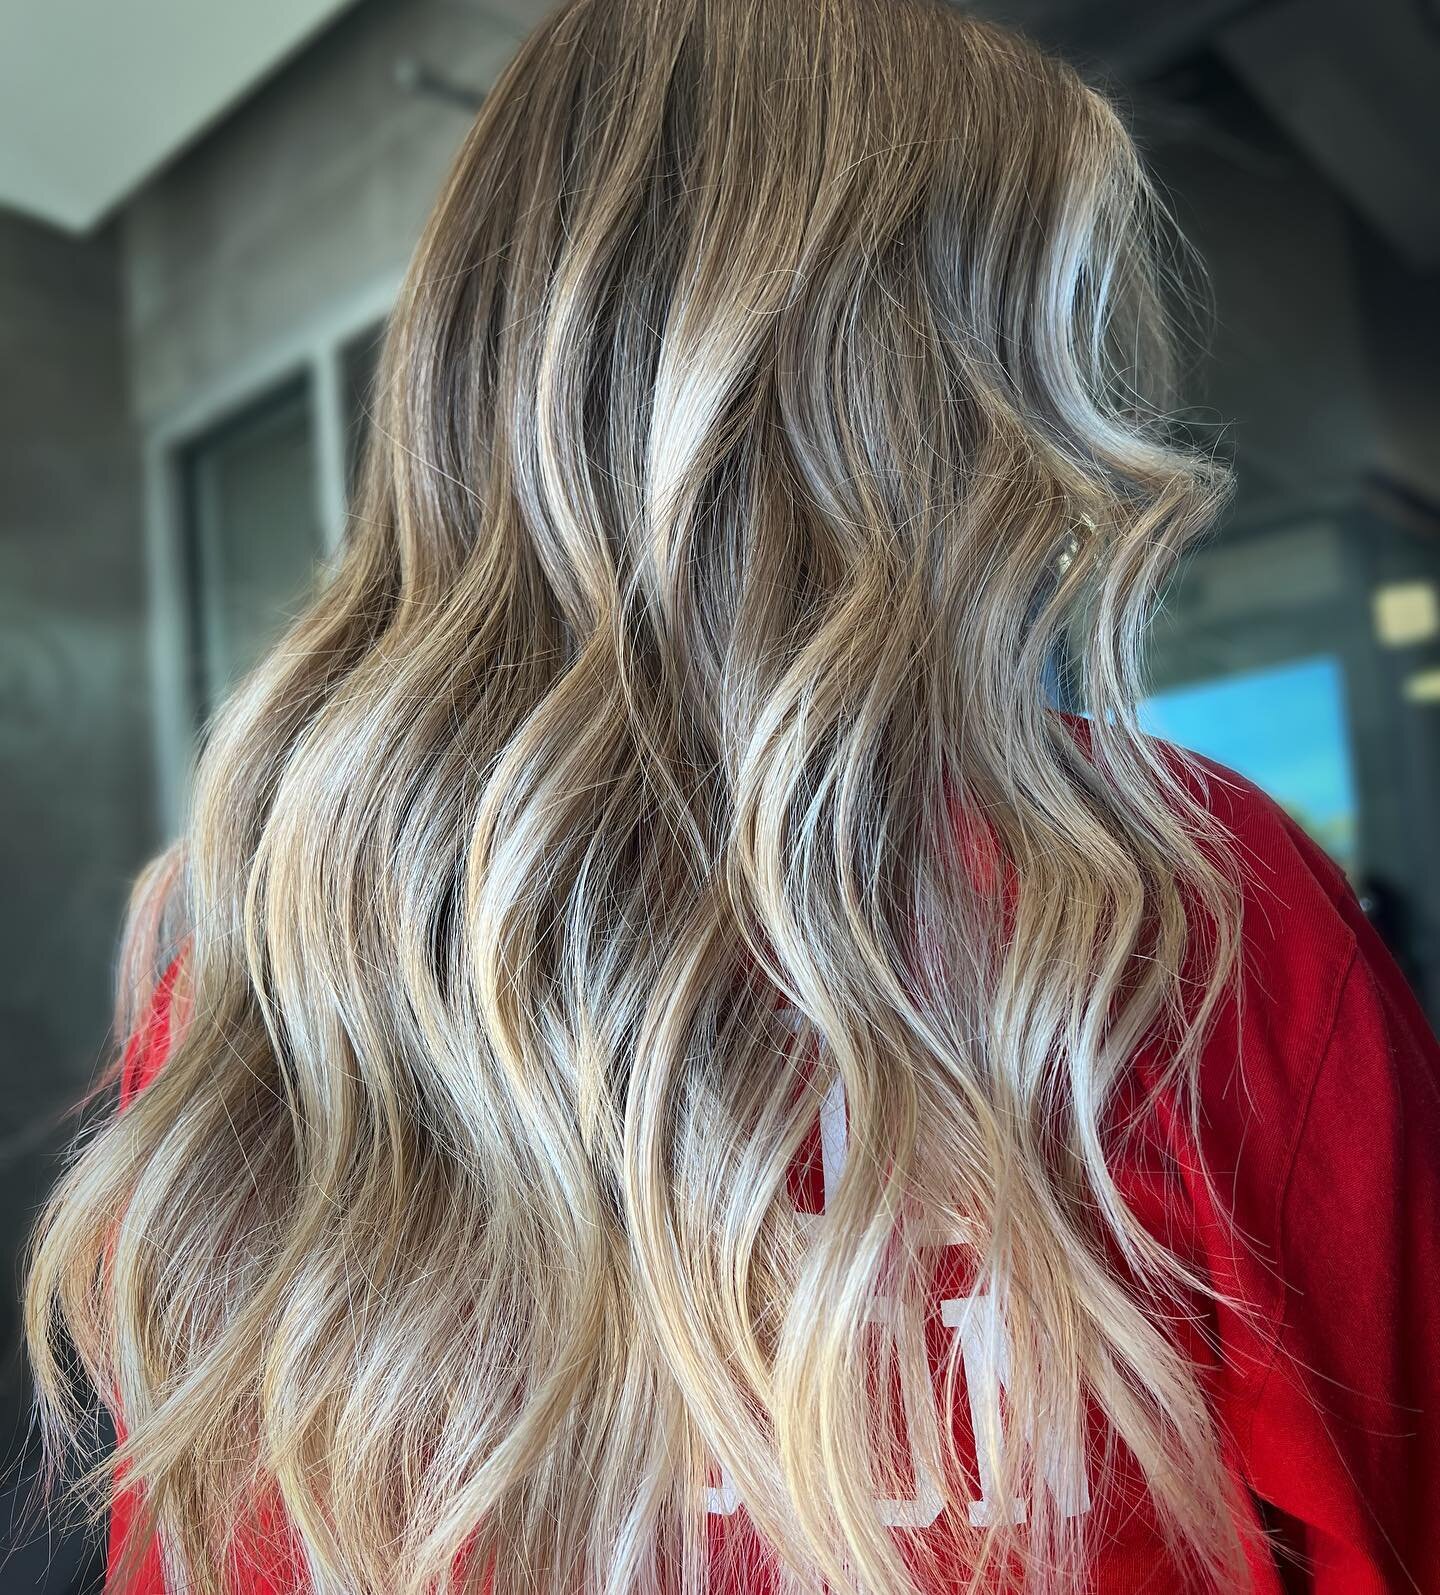 Let&rsquo;s talk about inspo pics real quick&hellip;.

This photo is HAIR GOALS for me and a lot of people I&rsquo;m sure so here&rsquo;s the reasons why I could never have this EXACT hair: 

1. It&rsquo;s natural hair. Her natural volume and length 